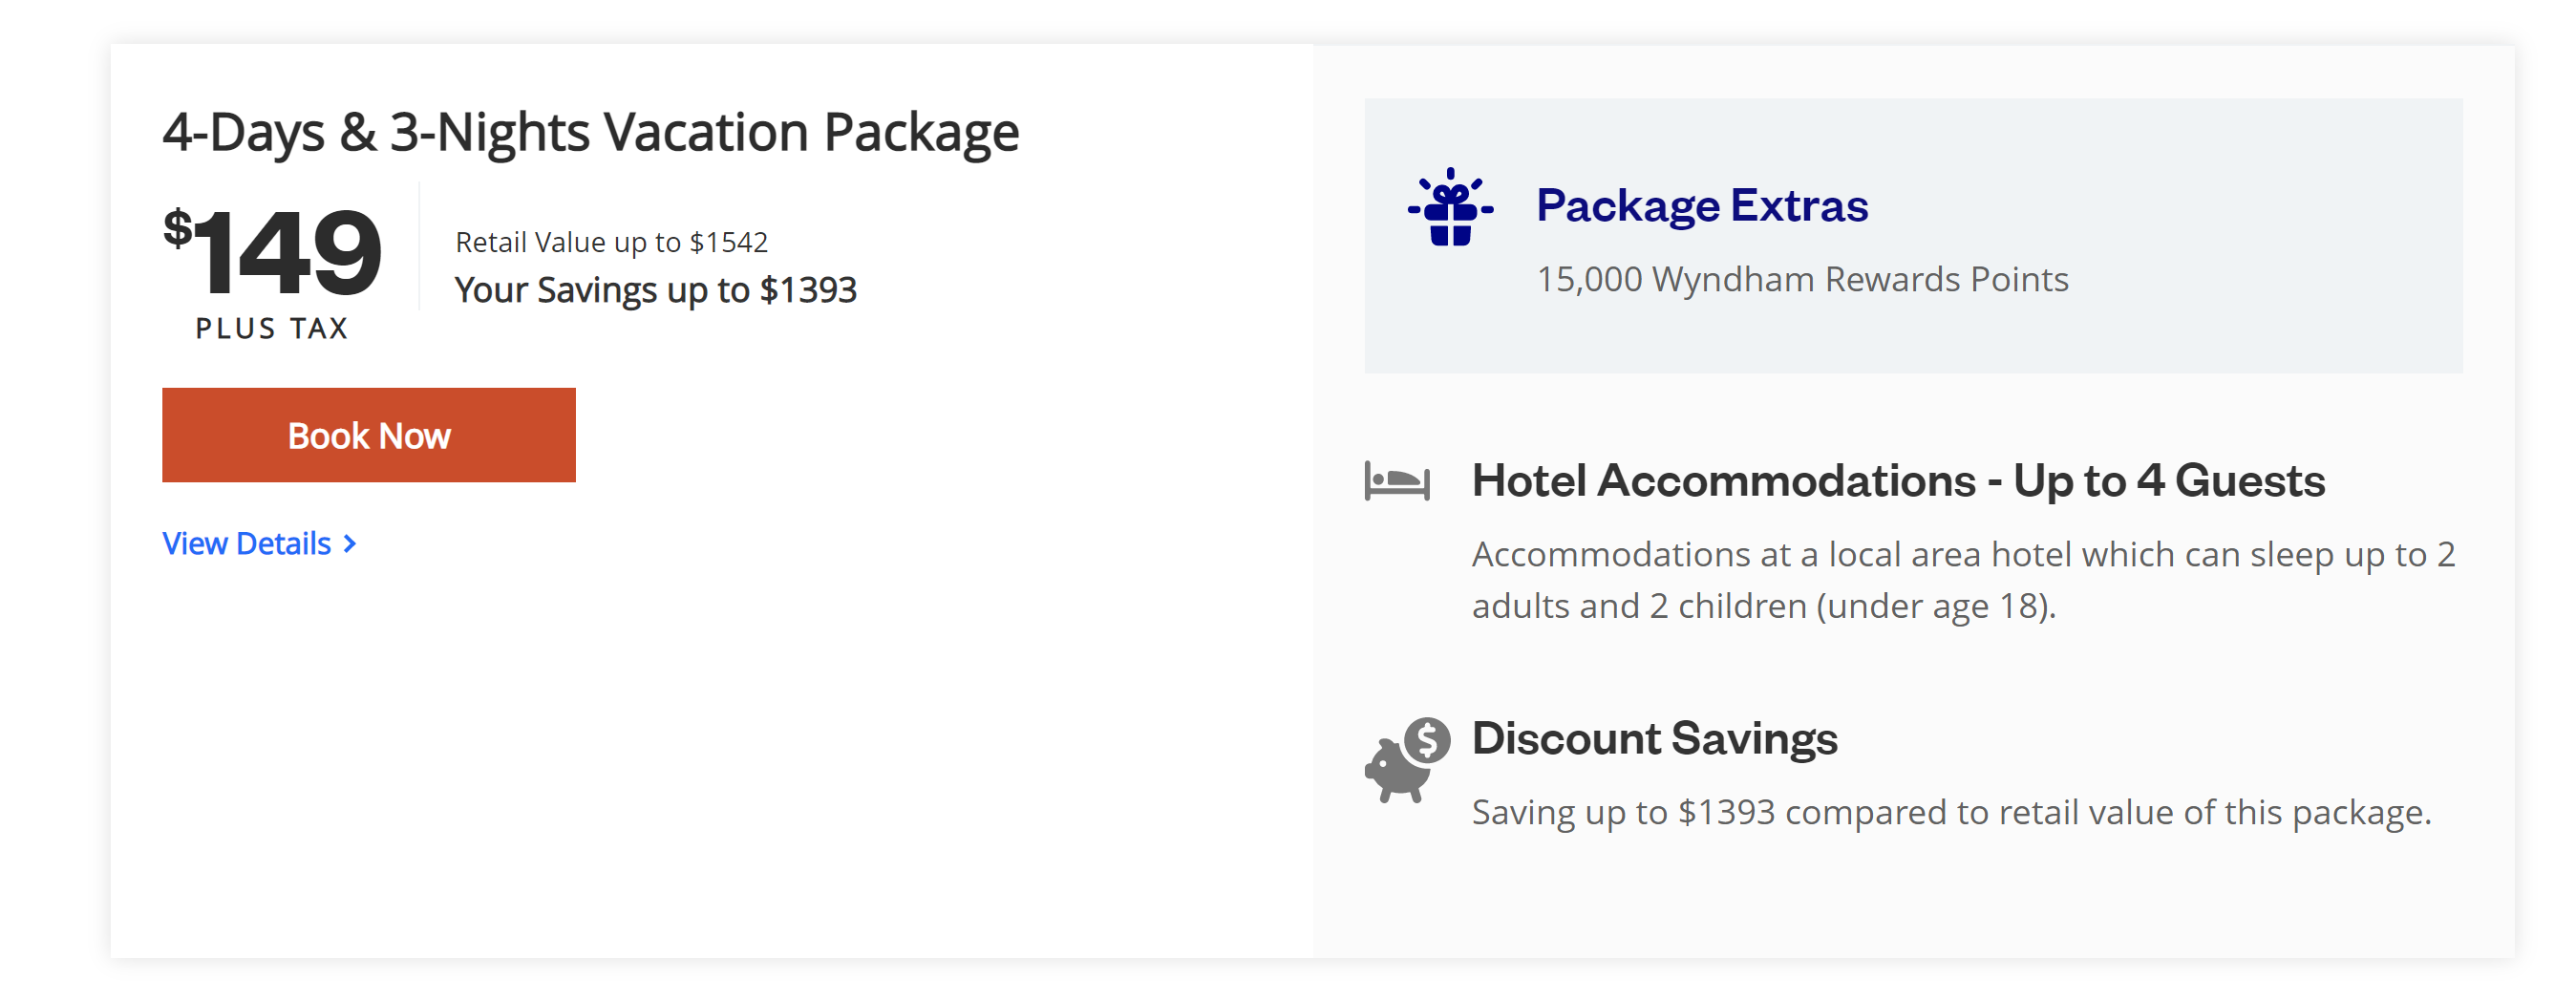 Wyndham timeshare offer: 3 nights + 15K points for $149 or $199 (at a Fairfield?!?)